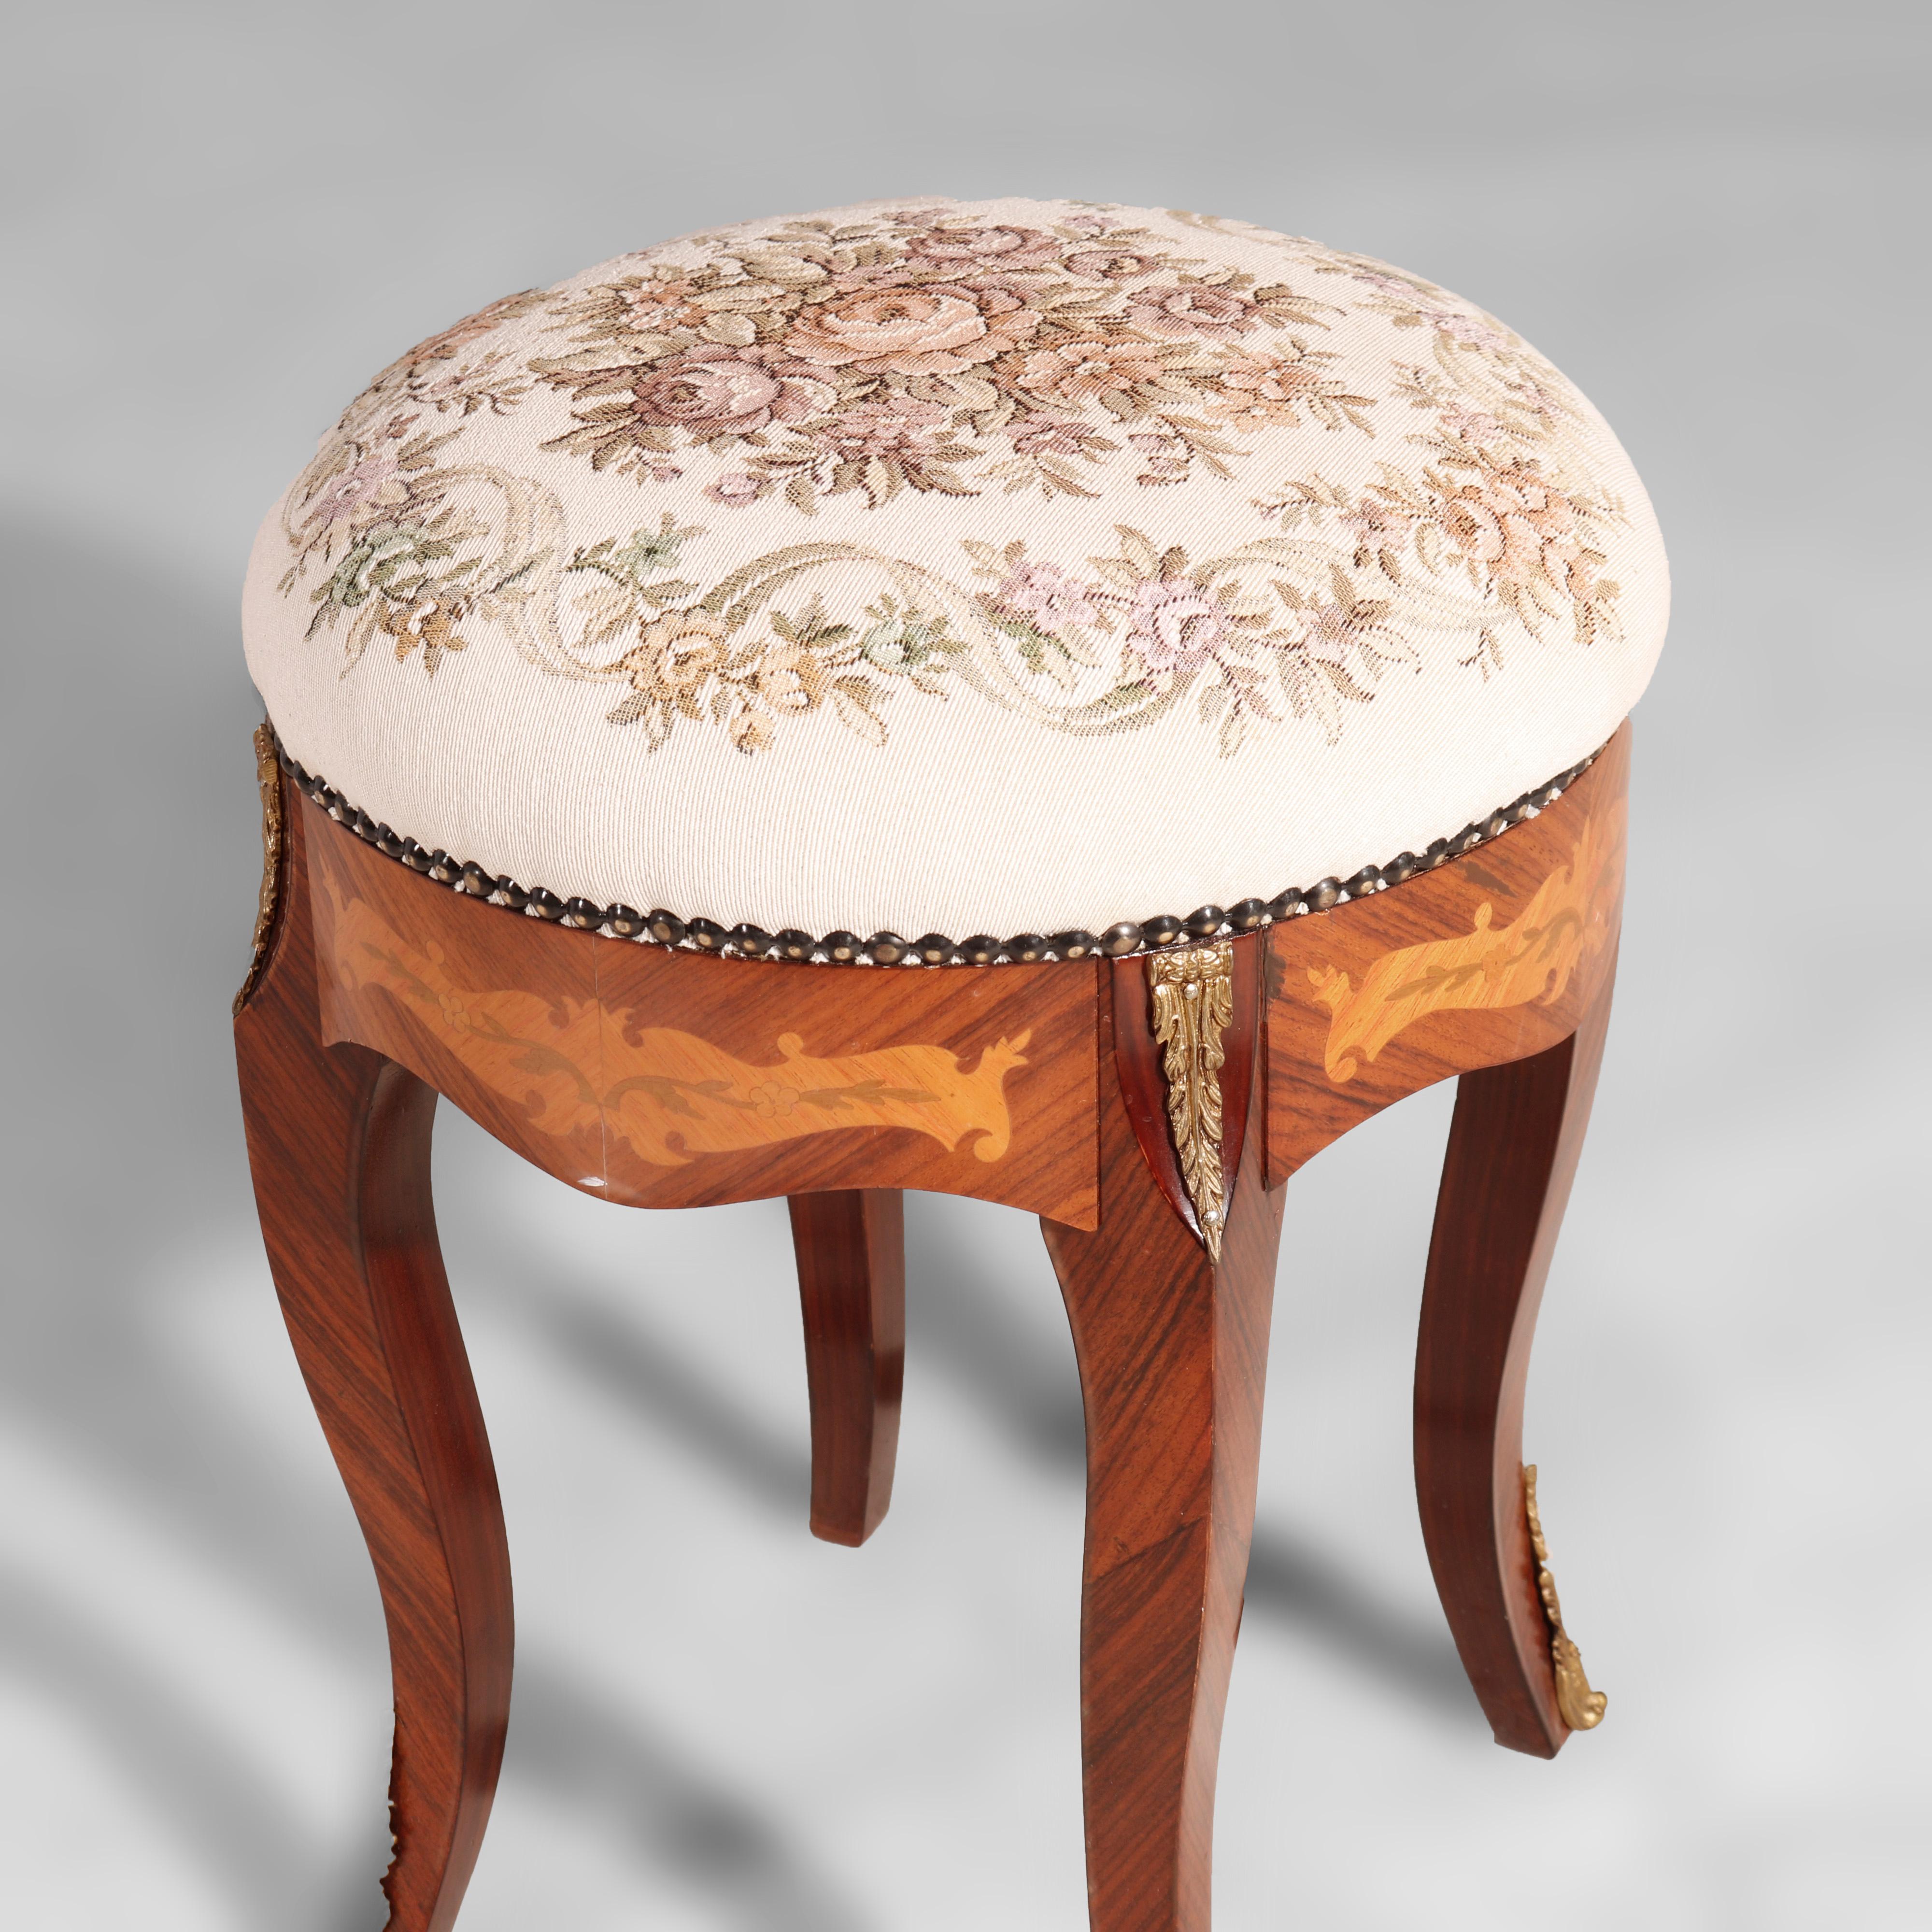 20th Century French Louis XIV Kingwood & Satinwood Inlaid Stool with Tapestry Seat 20th C